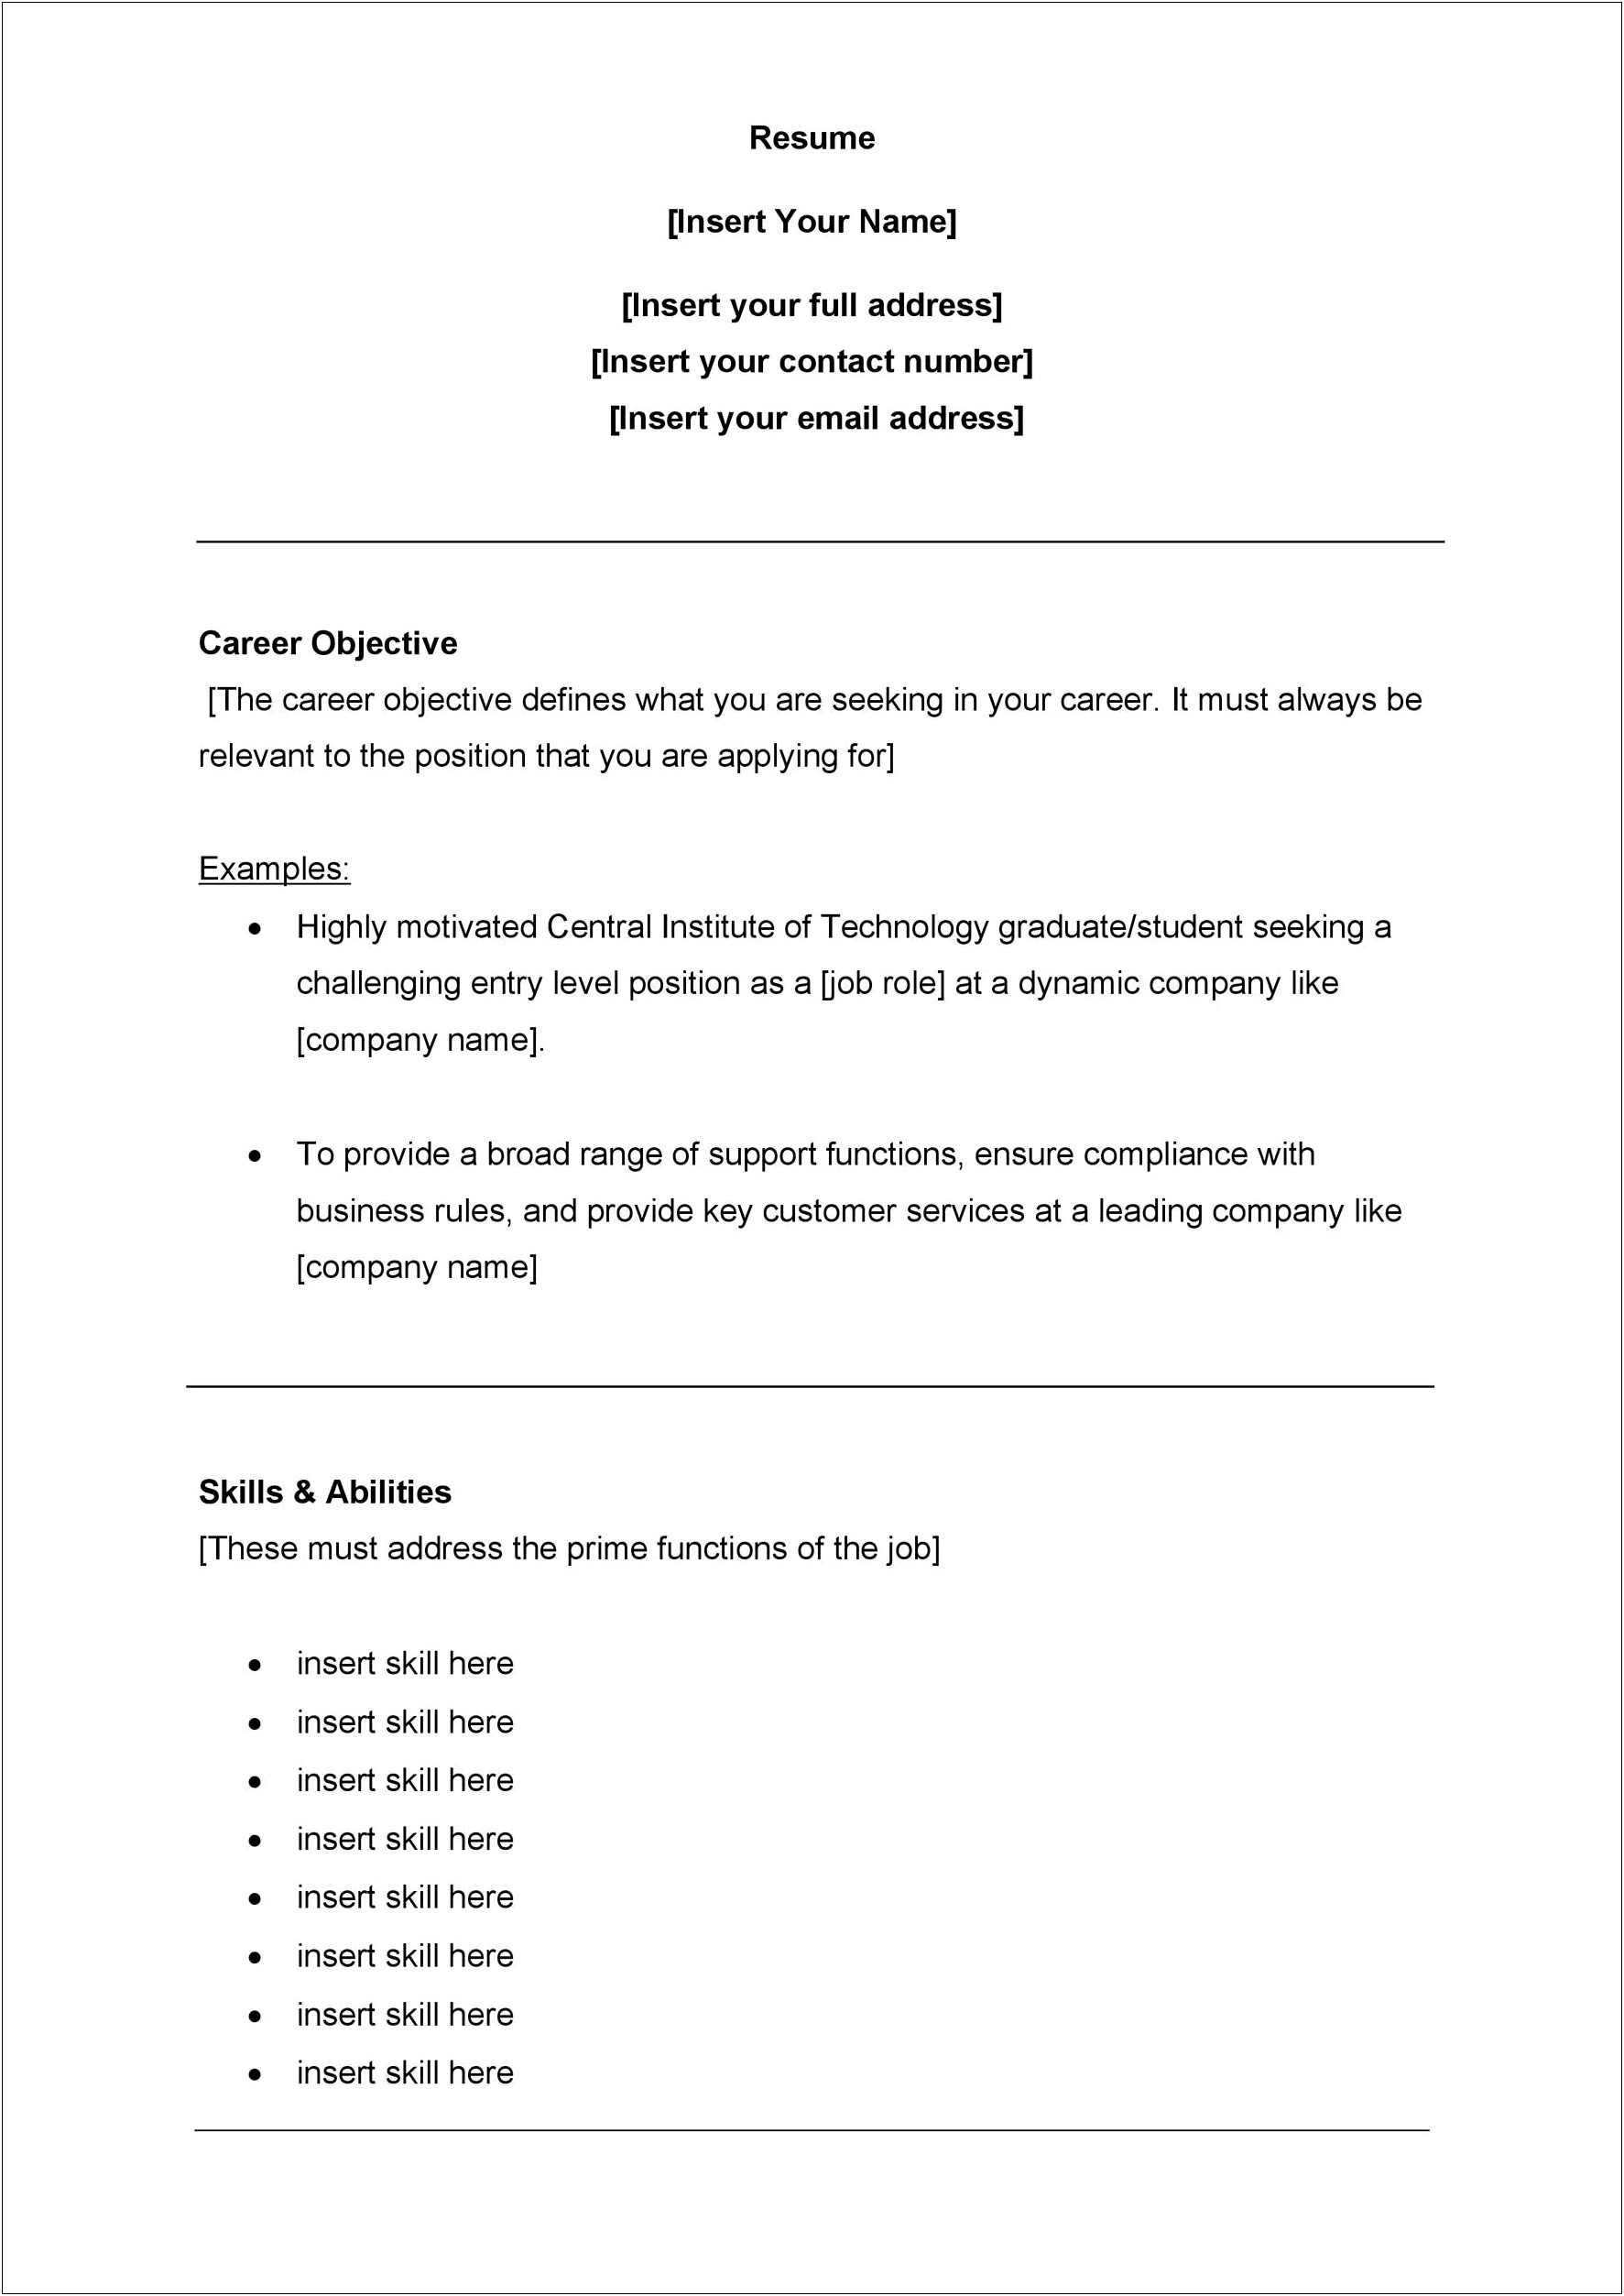 Example Resume Objective Statement Customer Service